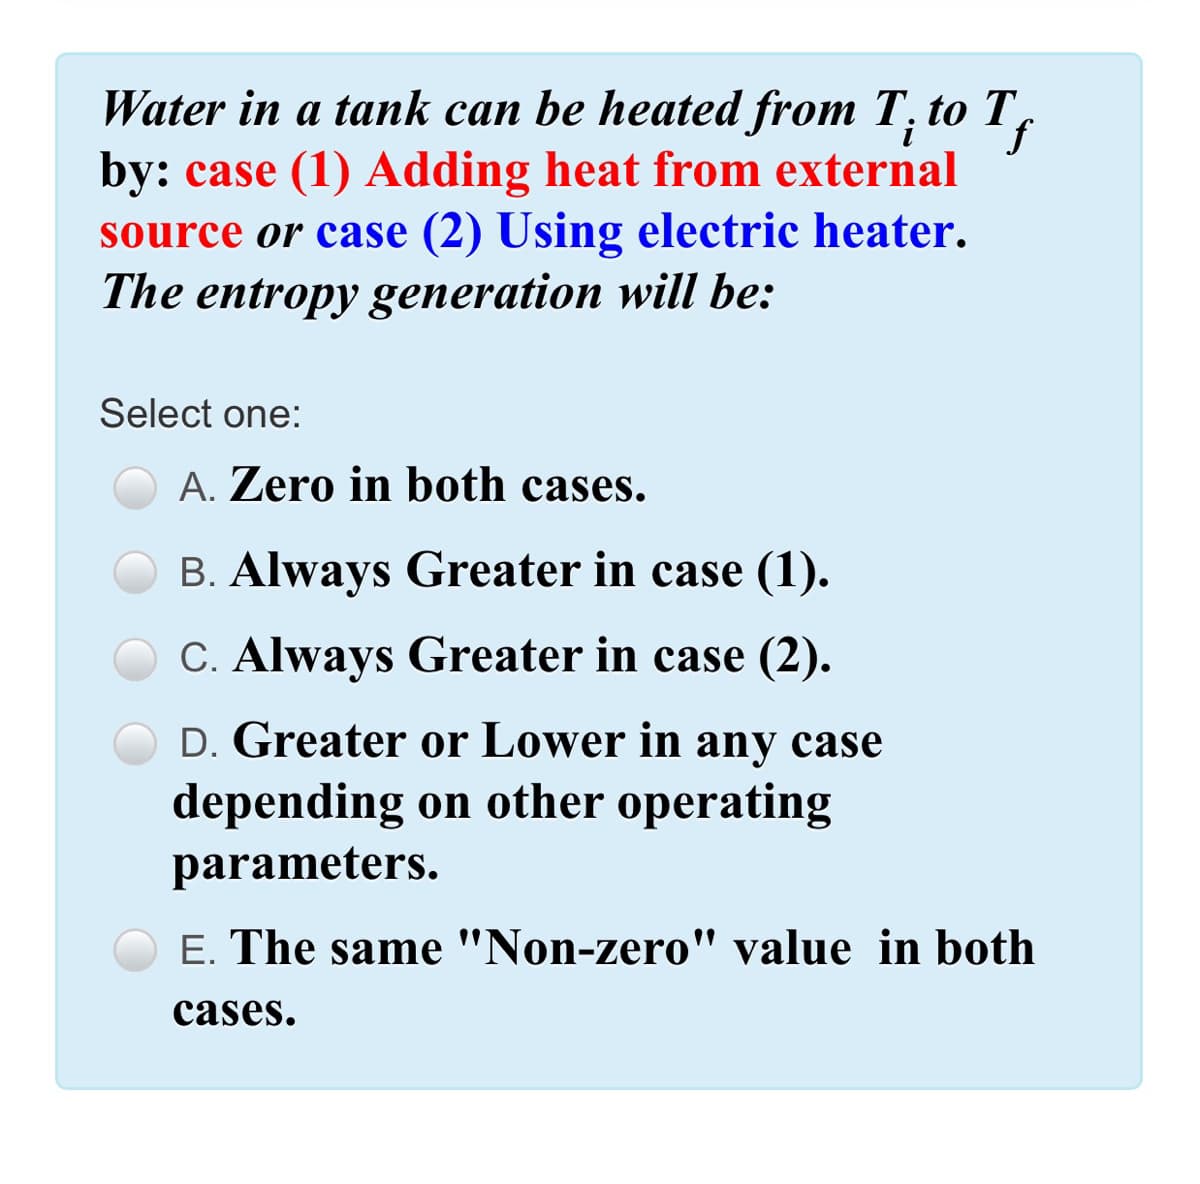 Water in a tank can be heated from T; to T,
if
by: case (1) Adding heat from external
source or case (2) Using electric heater.
i
The entropy generation will be:
Select one:
A. Zero in both cases.
B. Always Greater in case (1).
C. Always Greater in case (2).
D. Greater or Lower in any case
depending on other operating
parameters.
E. The same "Non-zero" value in both
cases.
